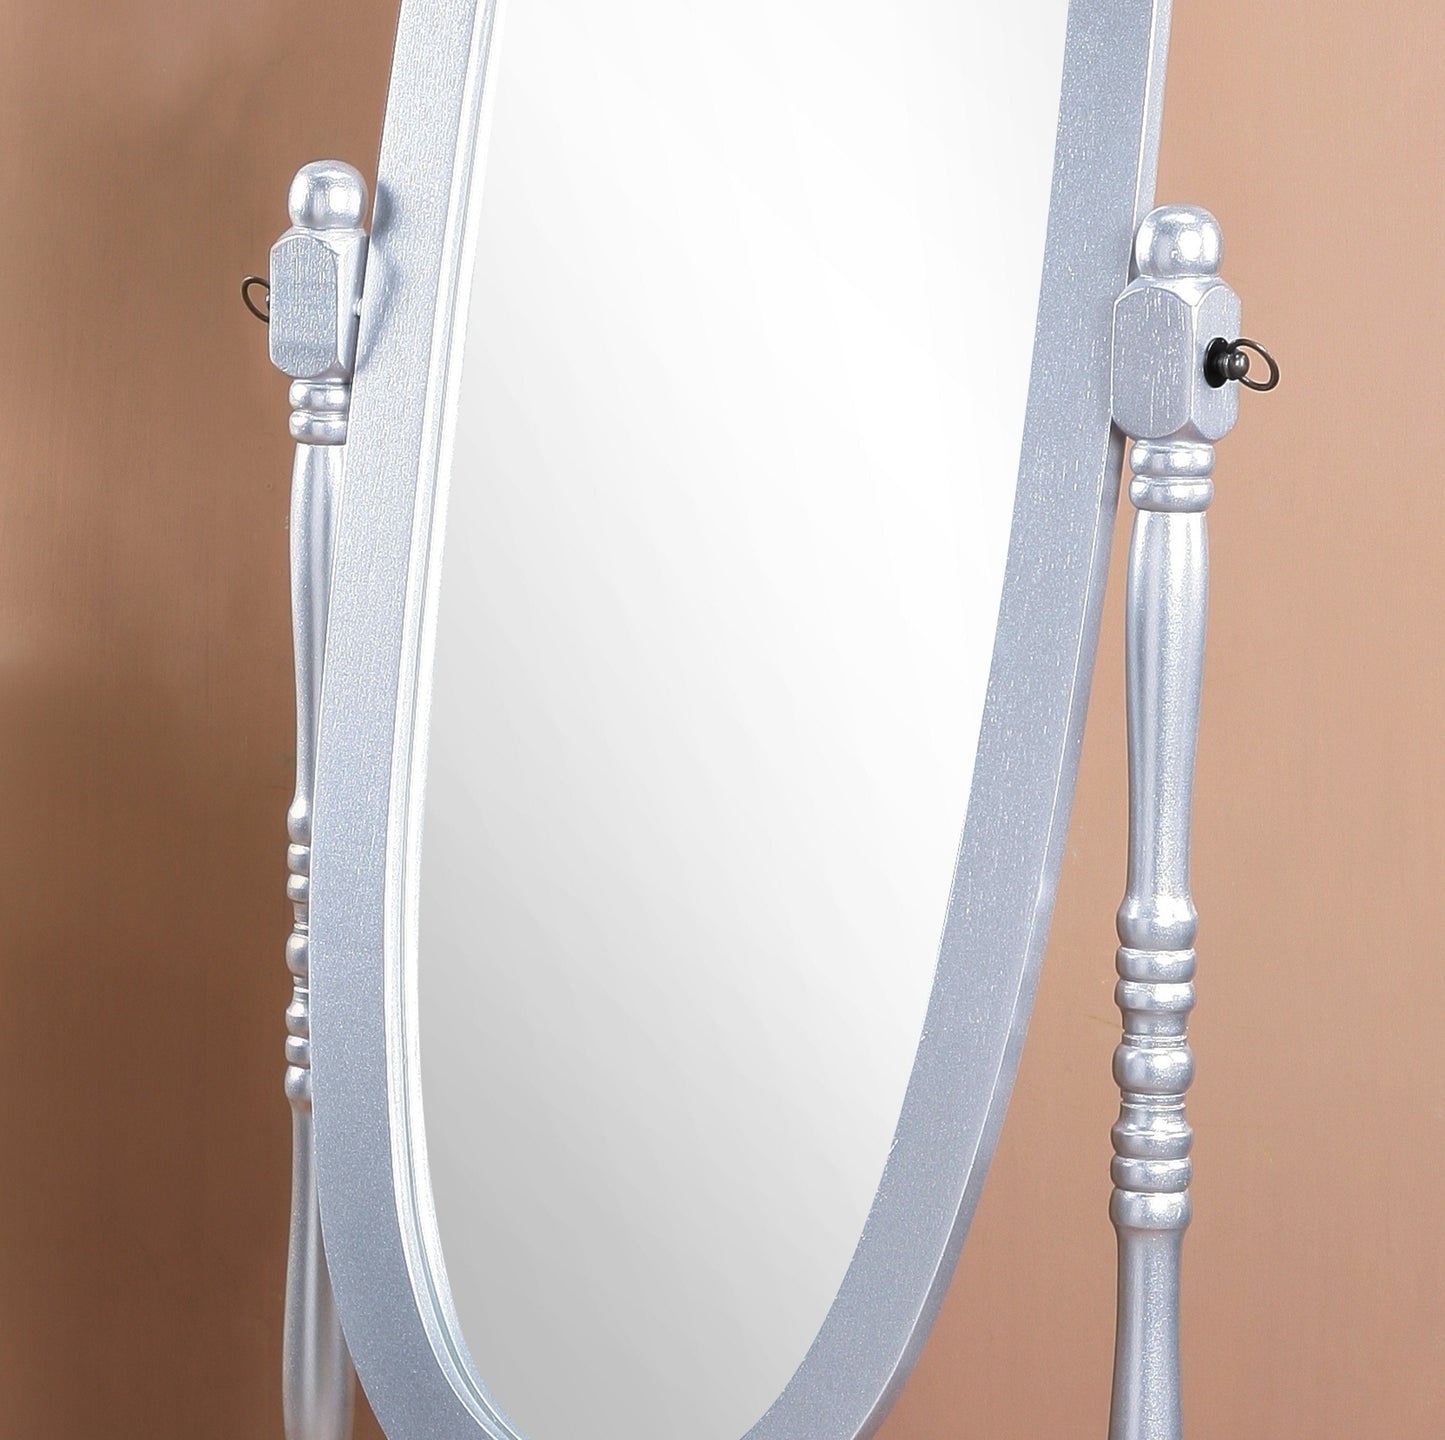 Traditional Queen Anna Style Wood Floor Cheval Mirror, Silver Finish